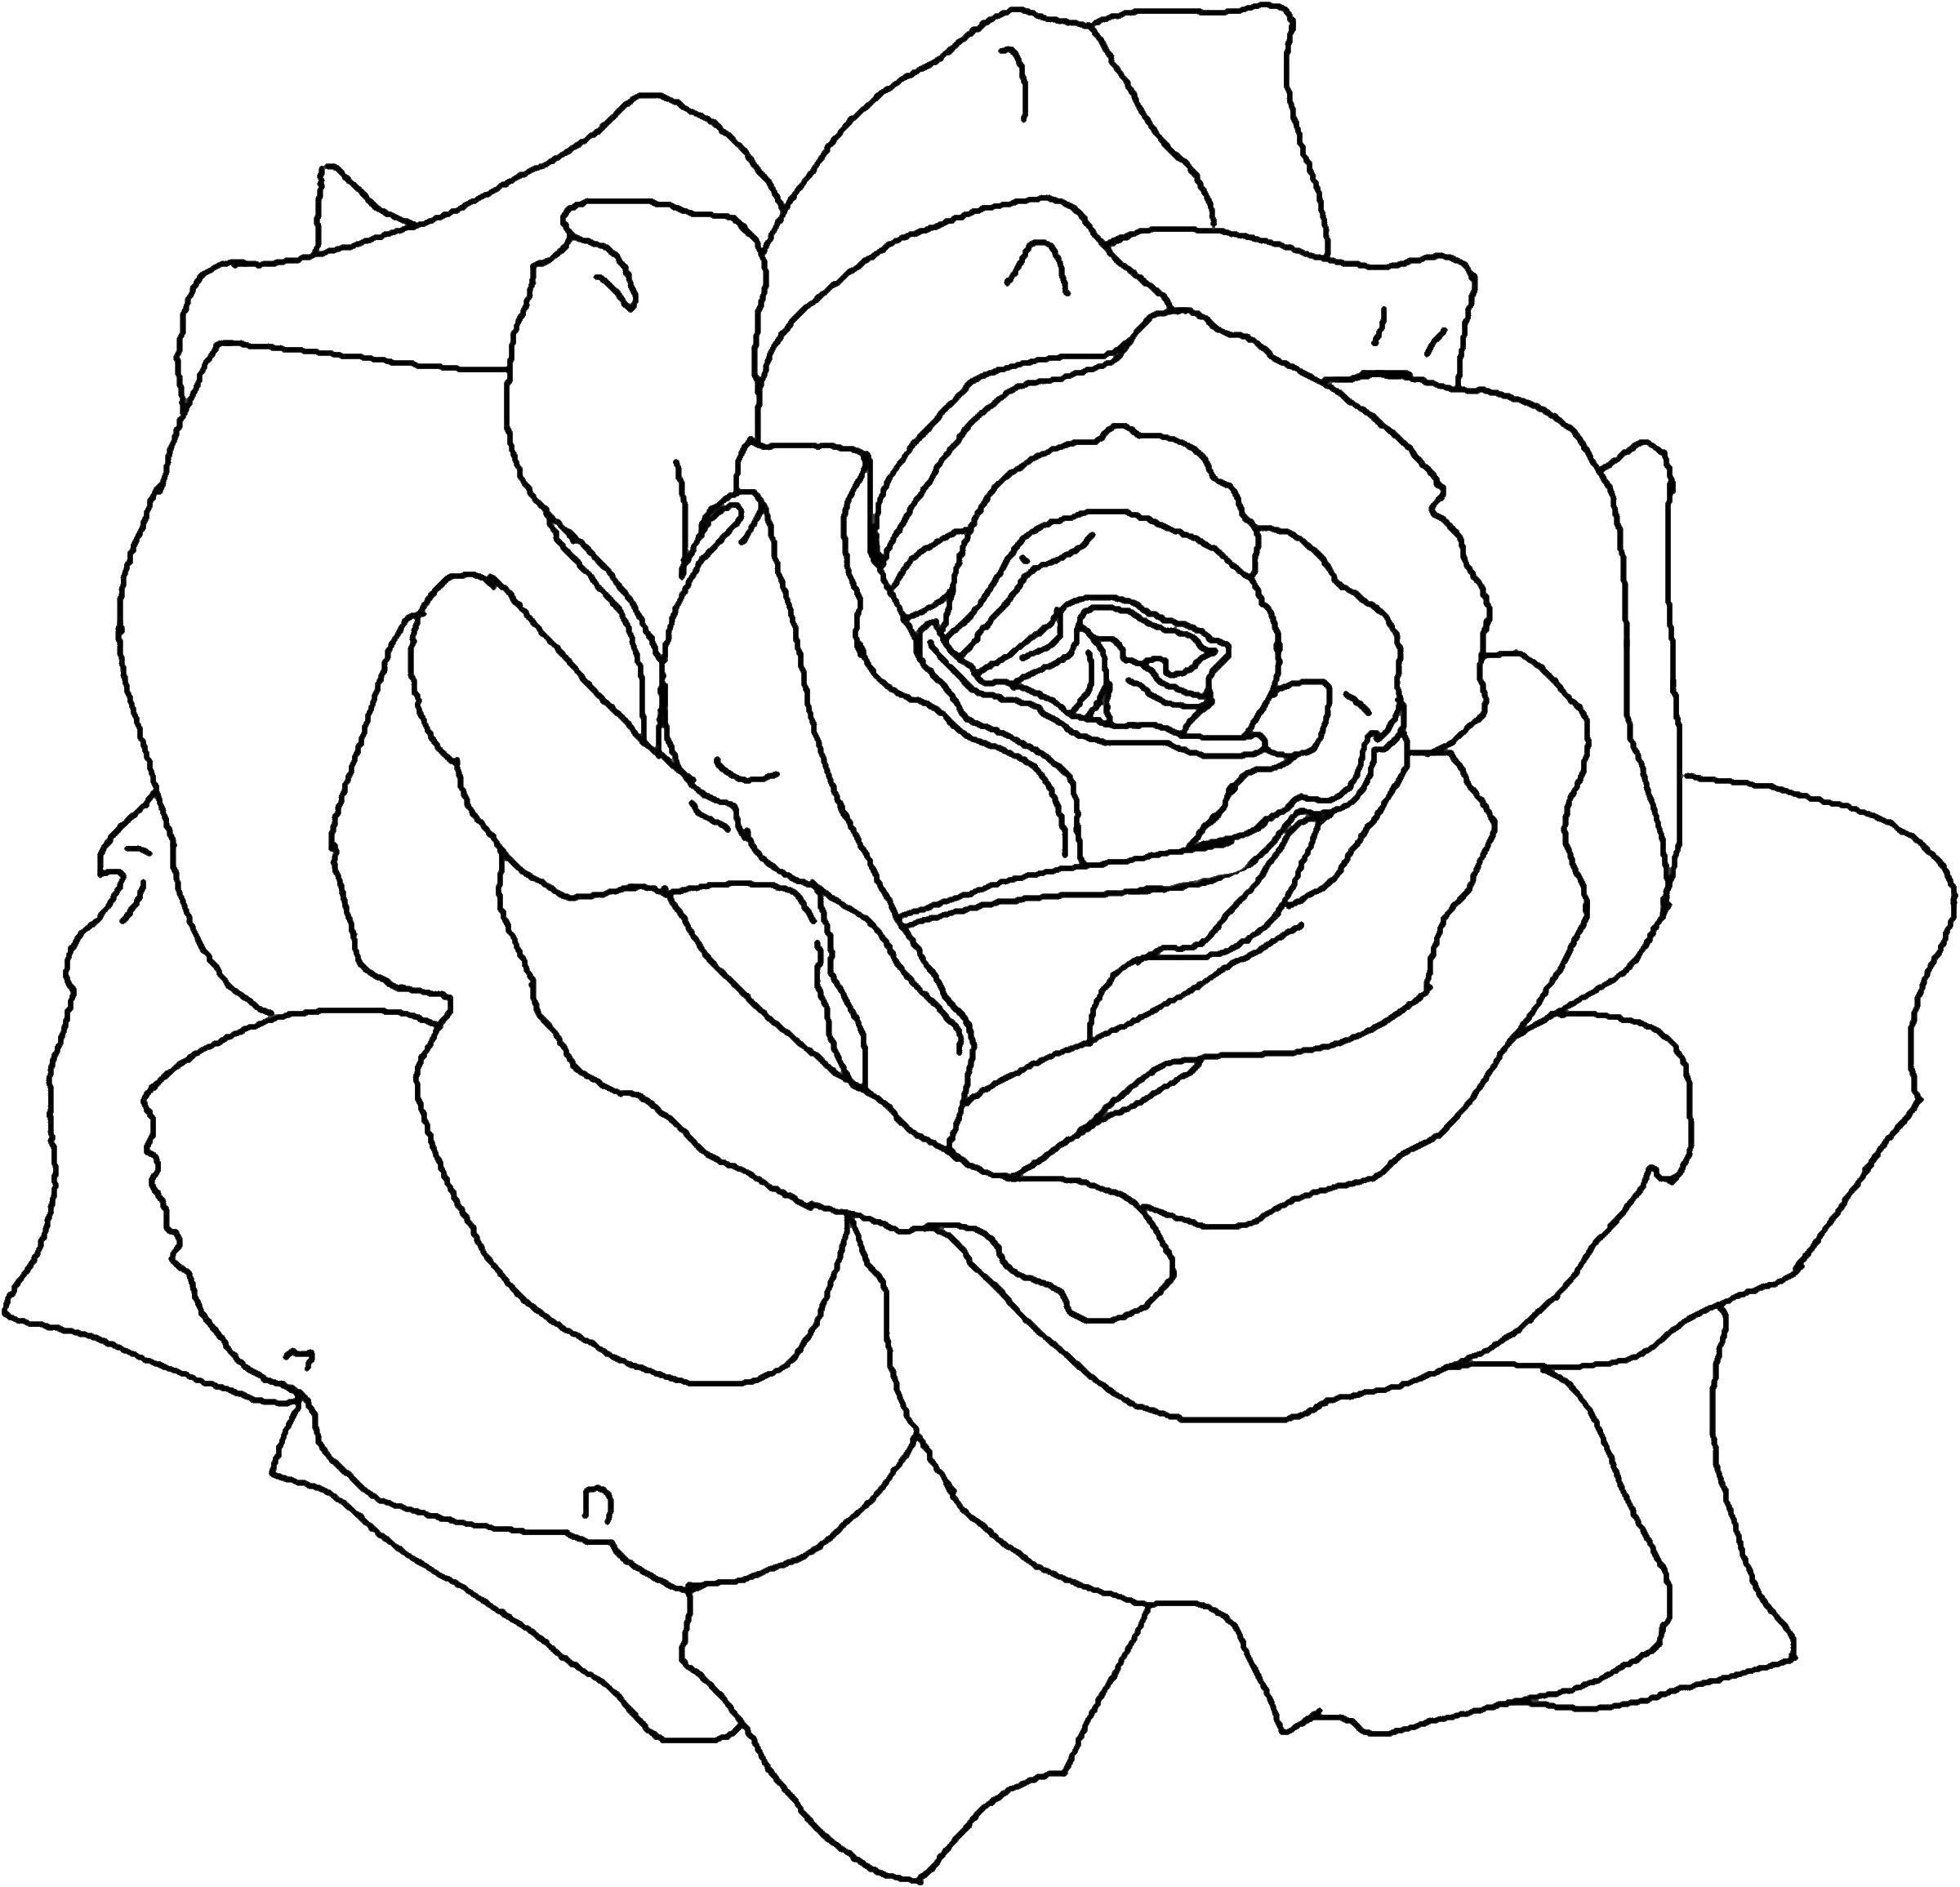 Coloring Rose. Category flowers. Tags:  flowers, plants, buds, petals, rose.